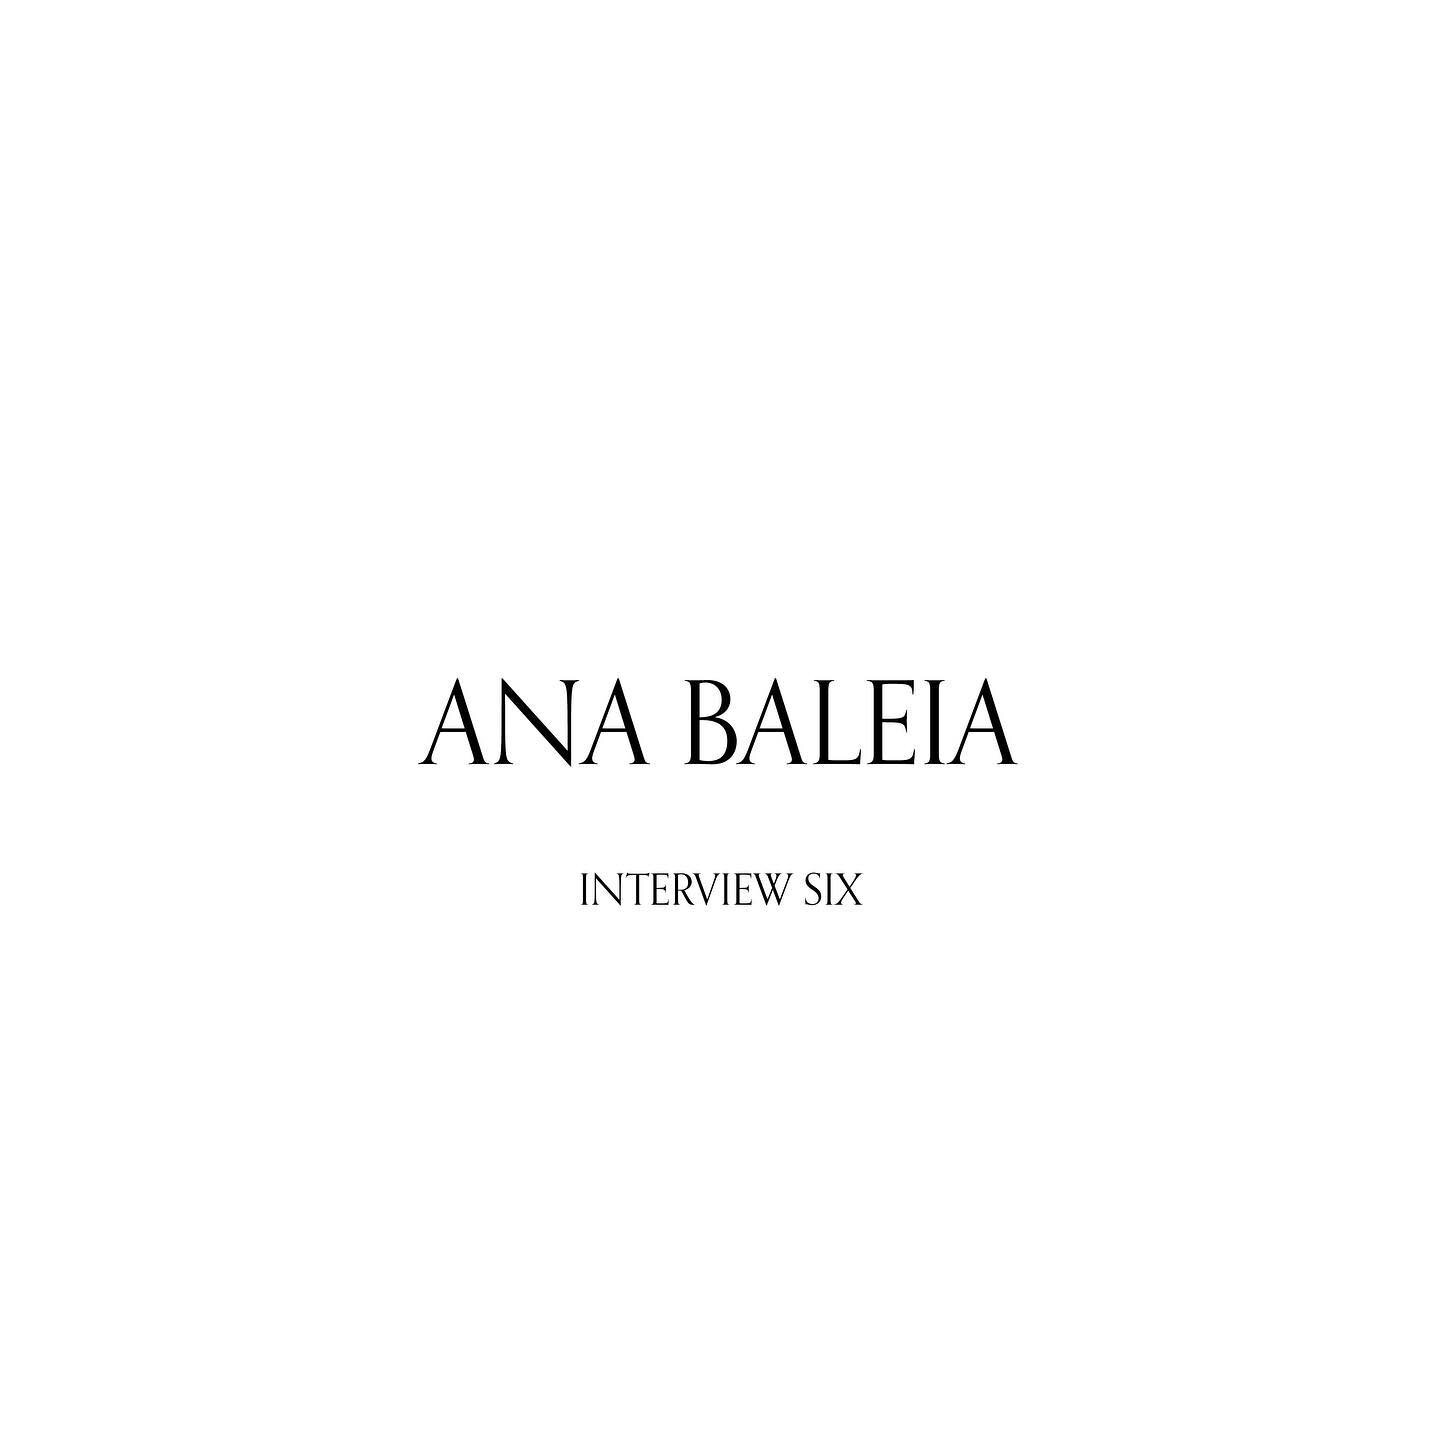 Plato is happy to present INTERVIEW SIX. For this sixth interview we focused on Ana Baleia @ana__baleia 

Check the full interview, both in English and Portuguese, in our website (link in BIO).